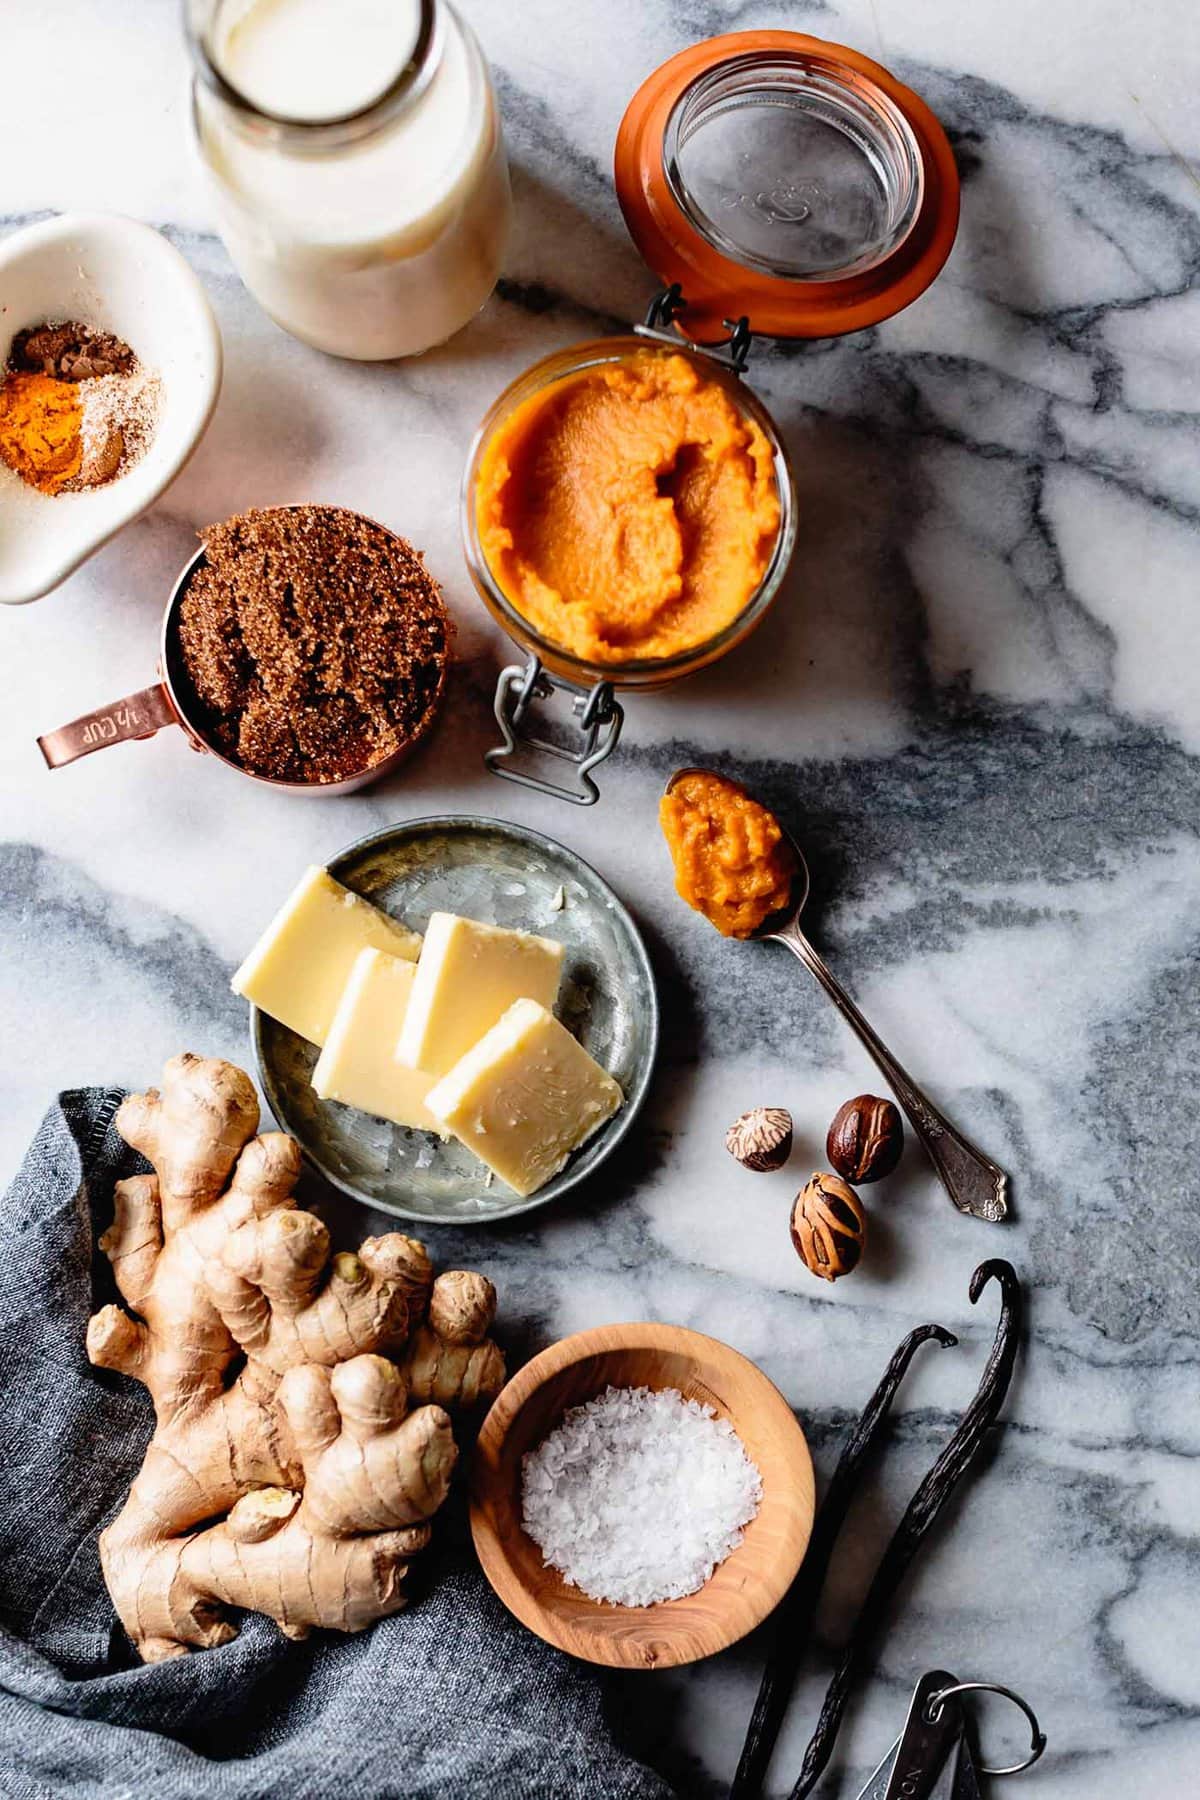 Ingredients for healthy pumpkin pudding have been arranged prettily on a marble countertop